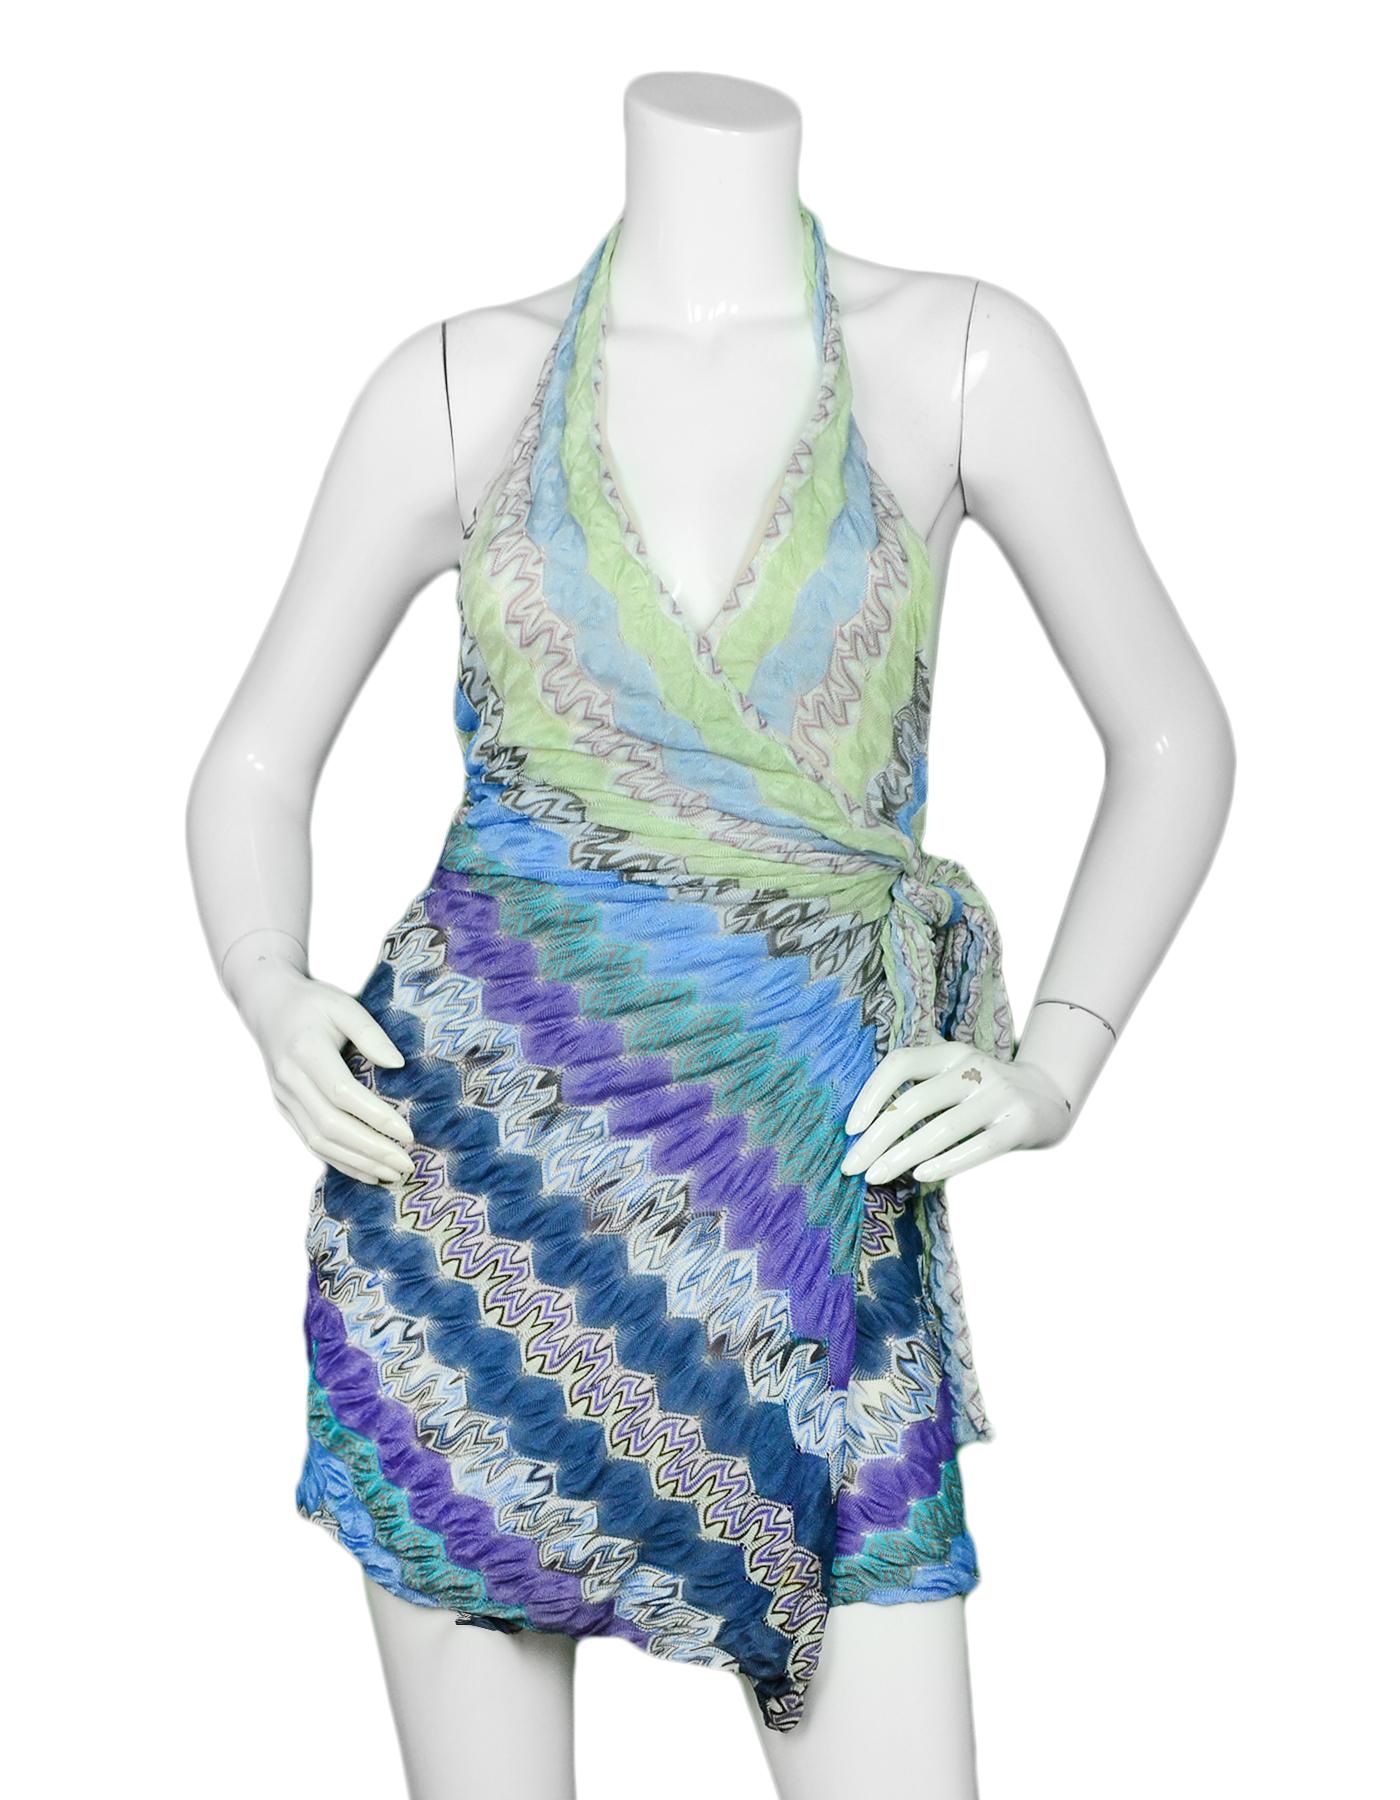 Missoni Multi-Color Halter Wrap Knit Dress sz IT 40

Made In: Italy
Year of Production:
Color: Multi-Color
Materials: 100% Viscose
Lining: 91% Silk, 9% Elastane
Closure/Opening: Slip on
Overall Condition: Excellent pre-owned condition

Tag Size: sz